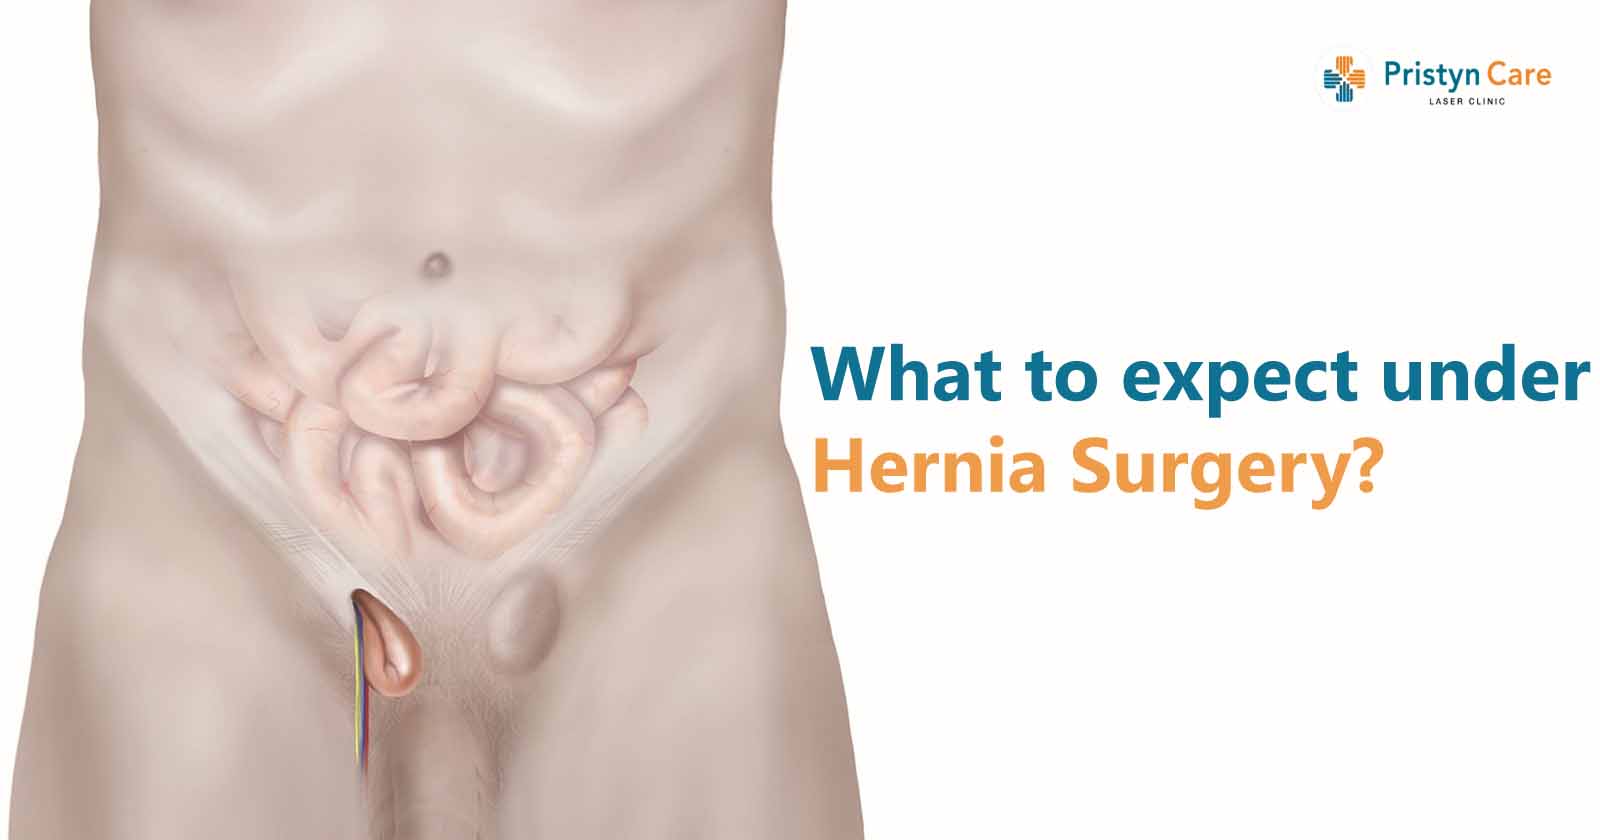 What to expect under Hernia Surgery?